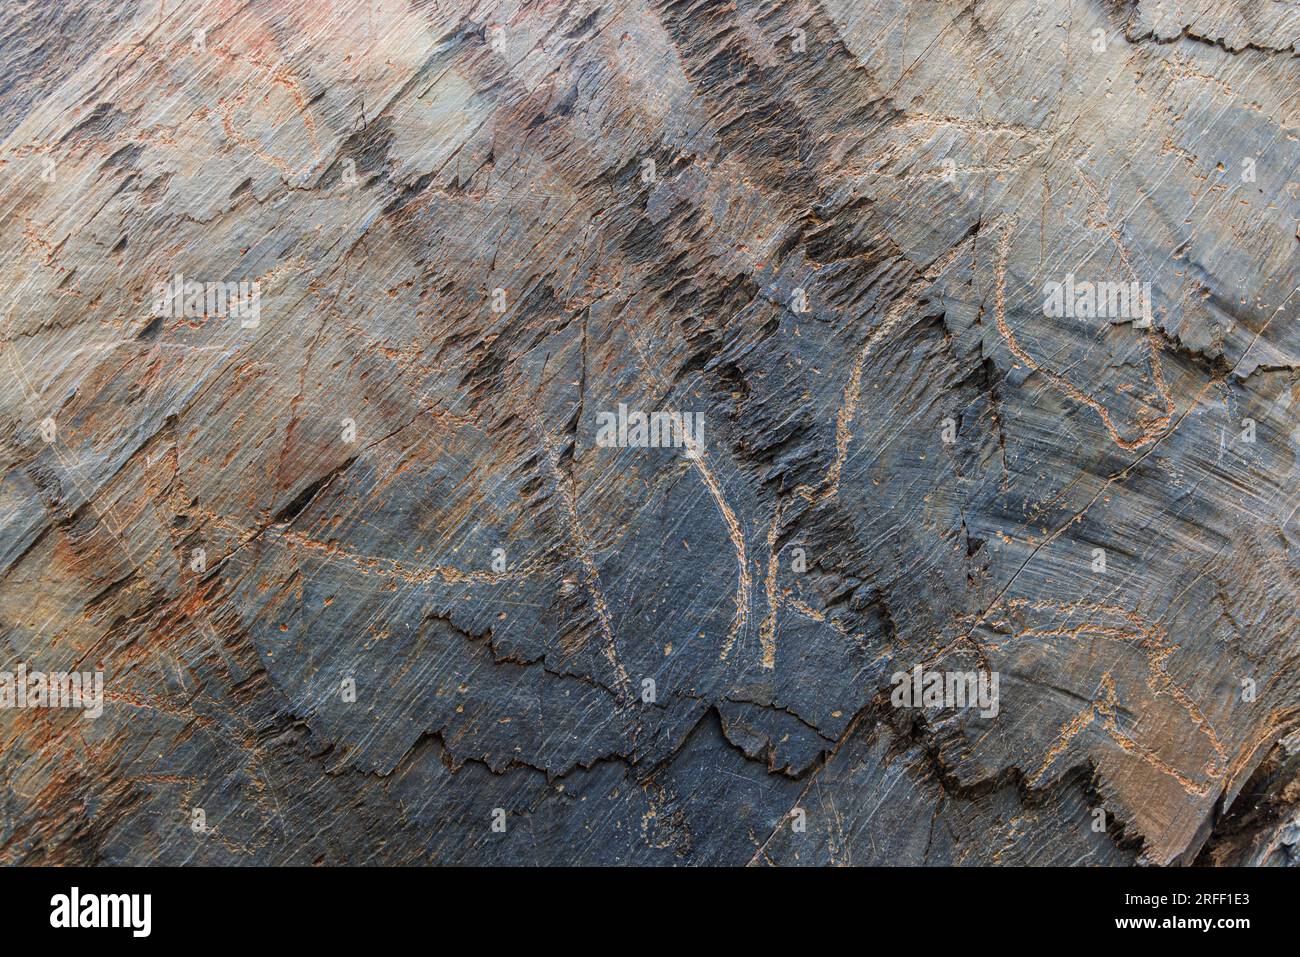 Spain, Castile and Leon, Villar de la Yegua, Prehistoric Rock Art Sites in the Coa Valley and Siega Verde listed as World Heritage by UNESCO, horse engraving Stock Photo